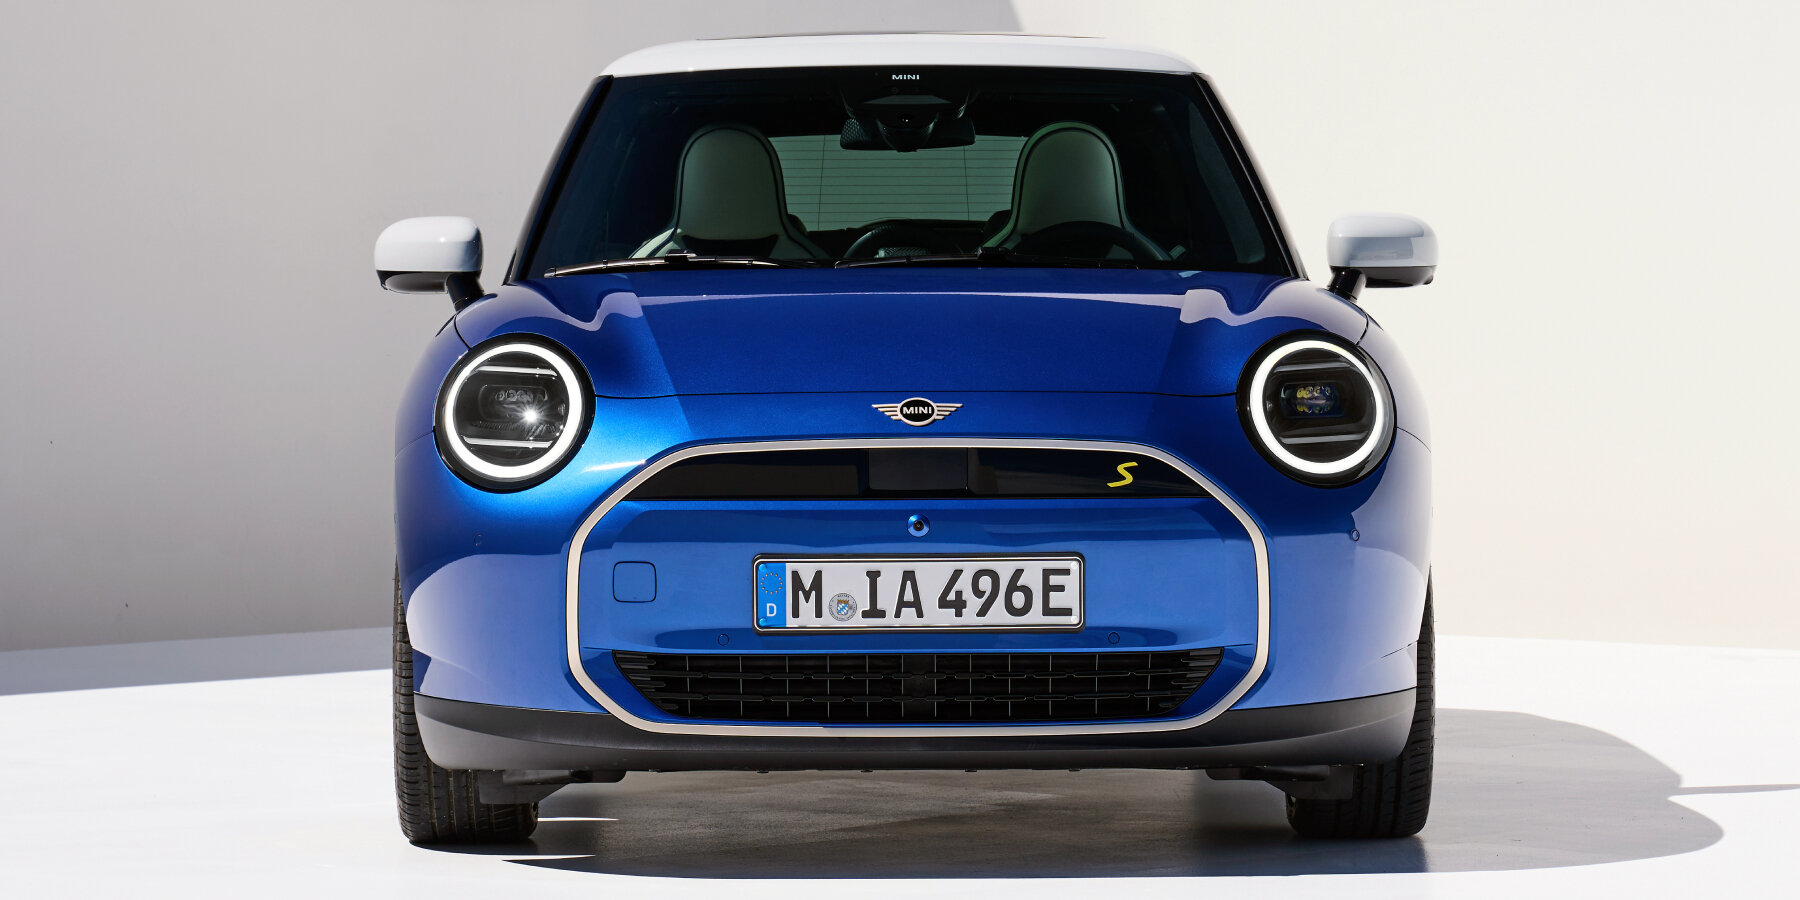 bon voyage, gearshift! MINI cooper gets resurrected as electric